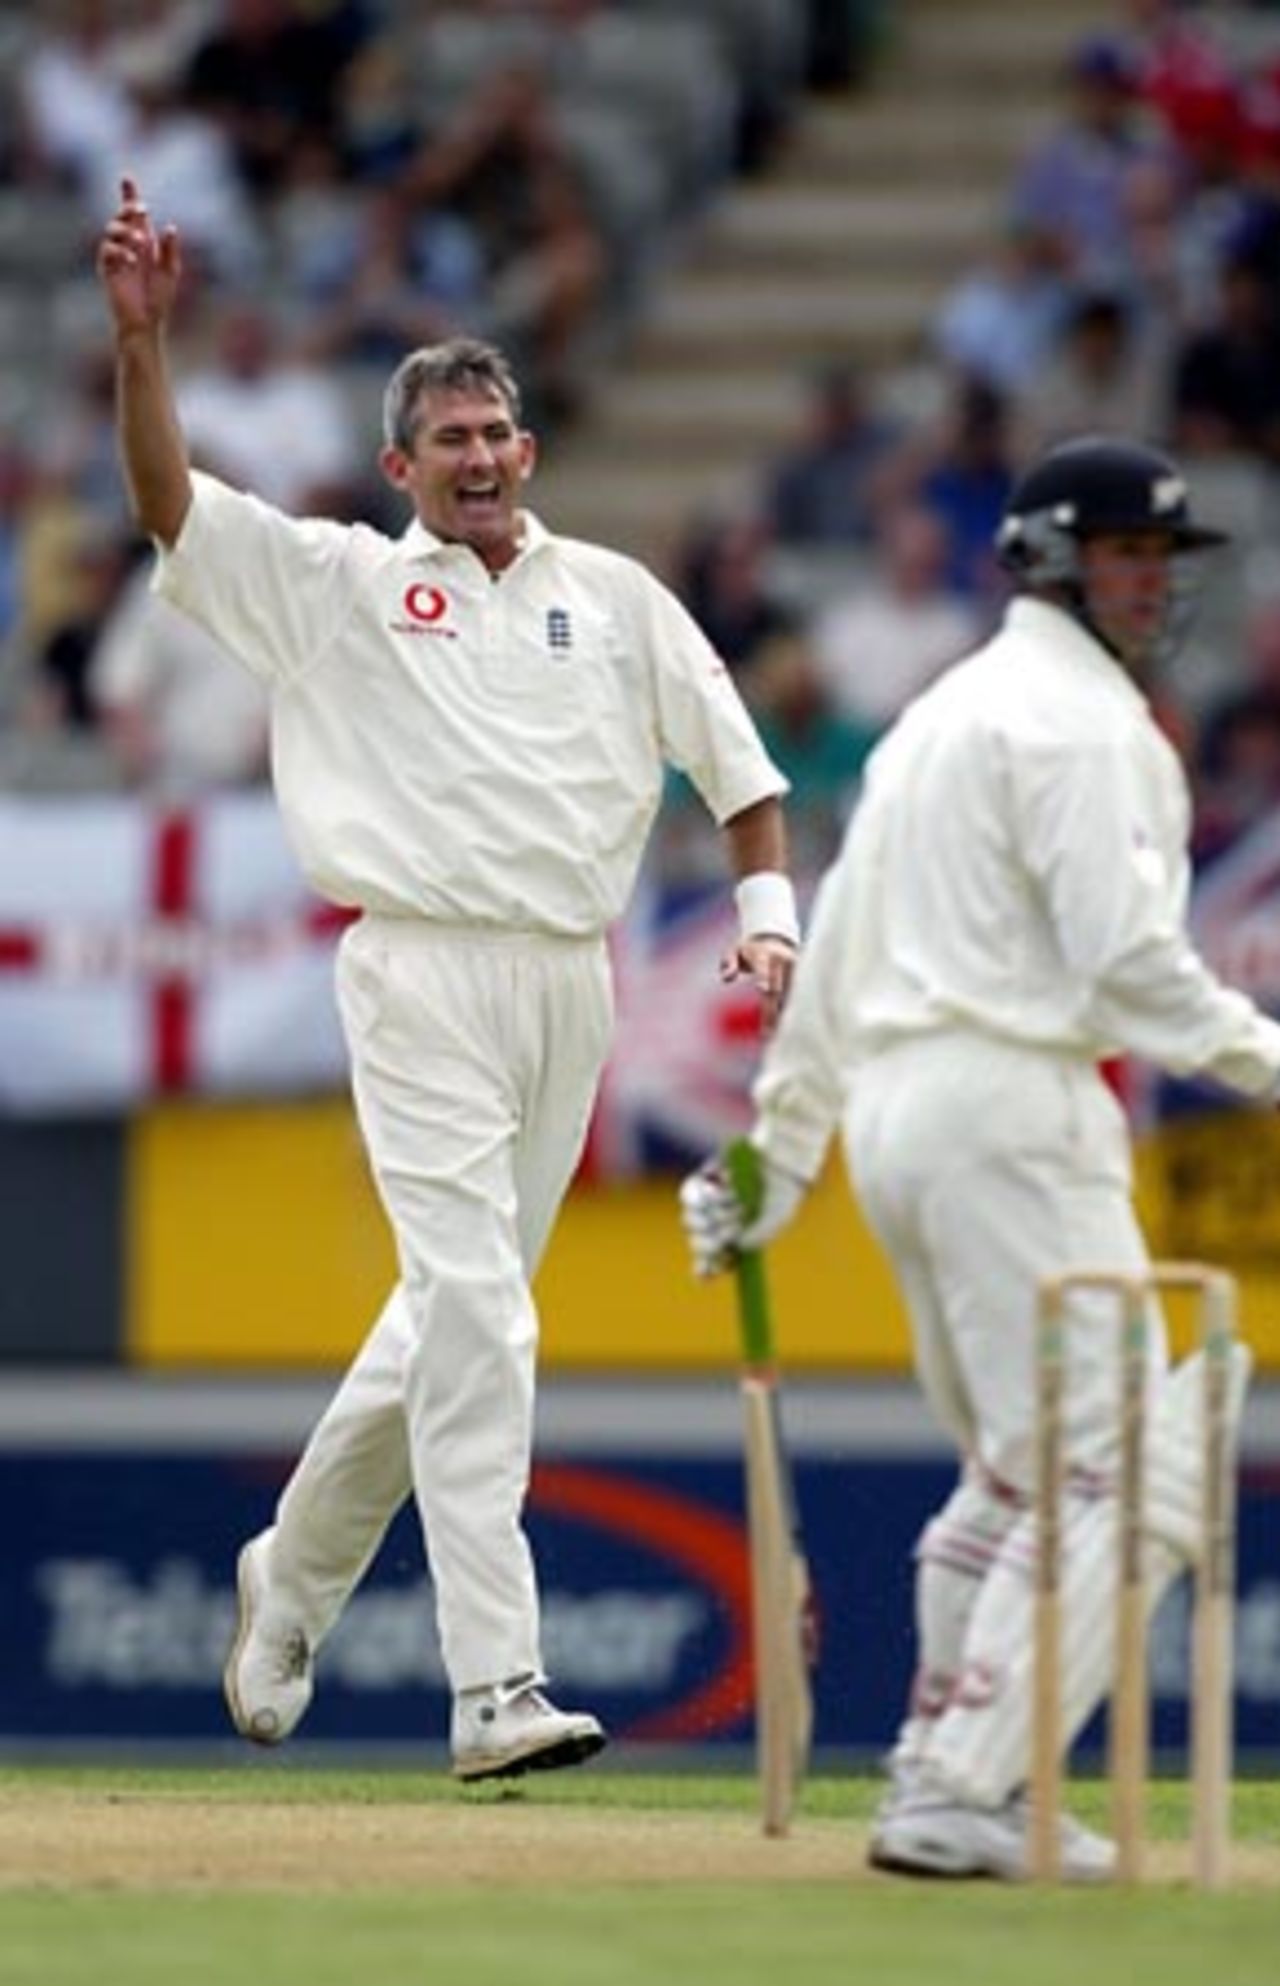 England bowler Andy Caddick celebrates the dismissal of New Zealand batsman Nathan Astle, caught by Graham Thorpe for two. Caddick ended his first day spell with 4-57 from 20 overs. 3rd Test: New Zealand v England at Eden Park, Auckland, 30 March-3 April 2002 (30 March 2002).